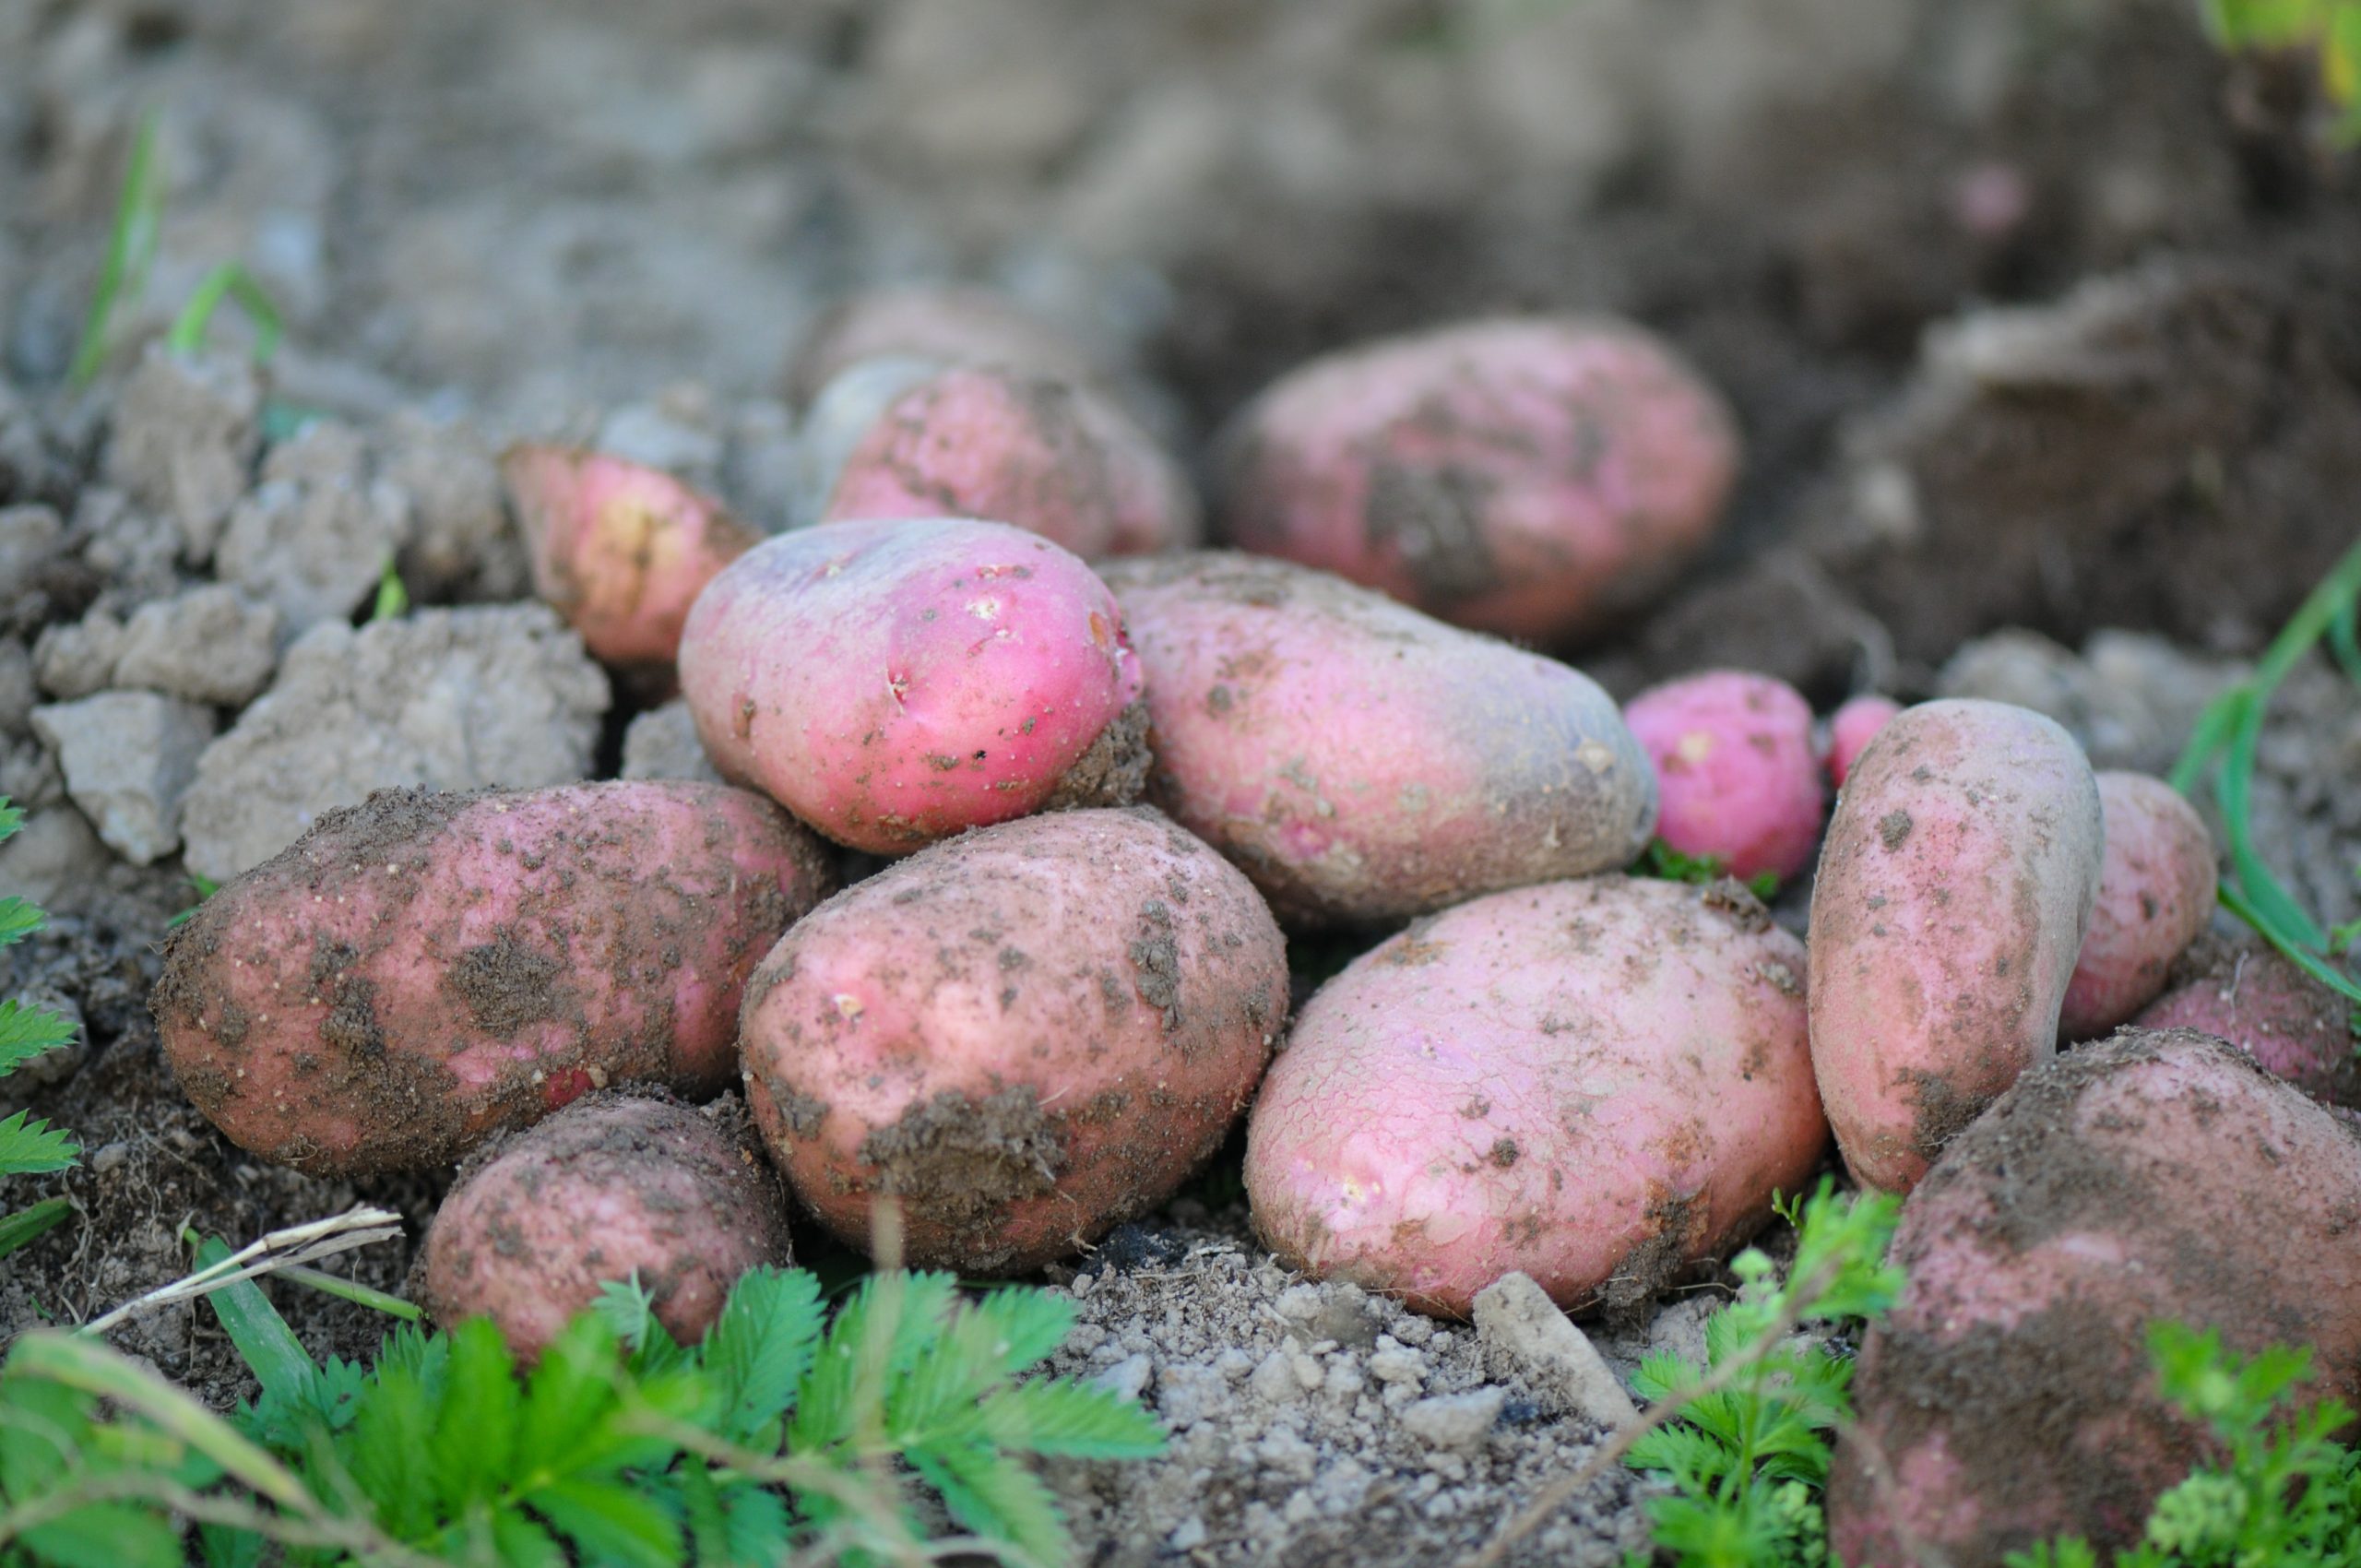 Are Potatoes Legumes? If Not What Are They?